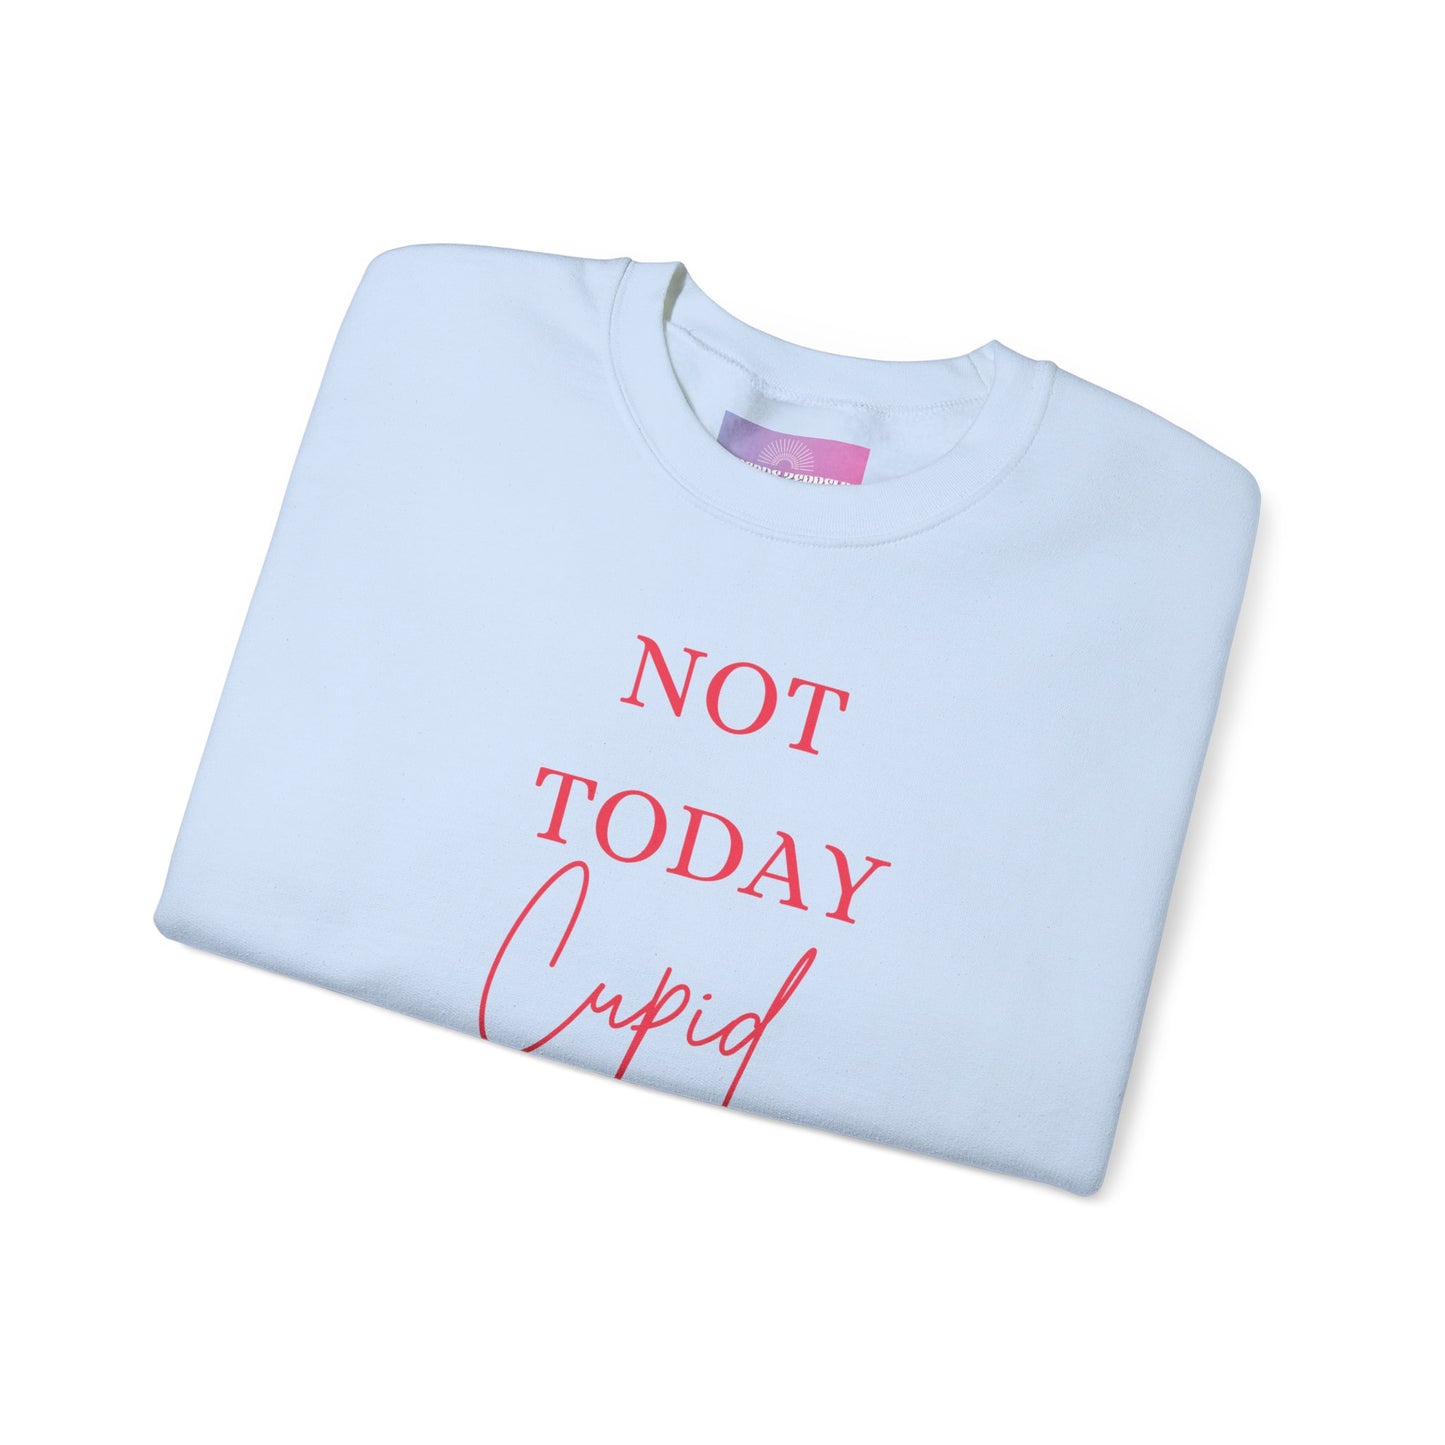 Not Today Cupid Sweatshirt, Funny Valentines Day Crewneck Sweater, Gift for bestie, Anti Valentines Day, Cupids Arrow, Gift for her